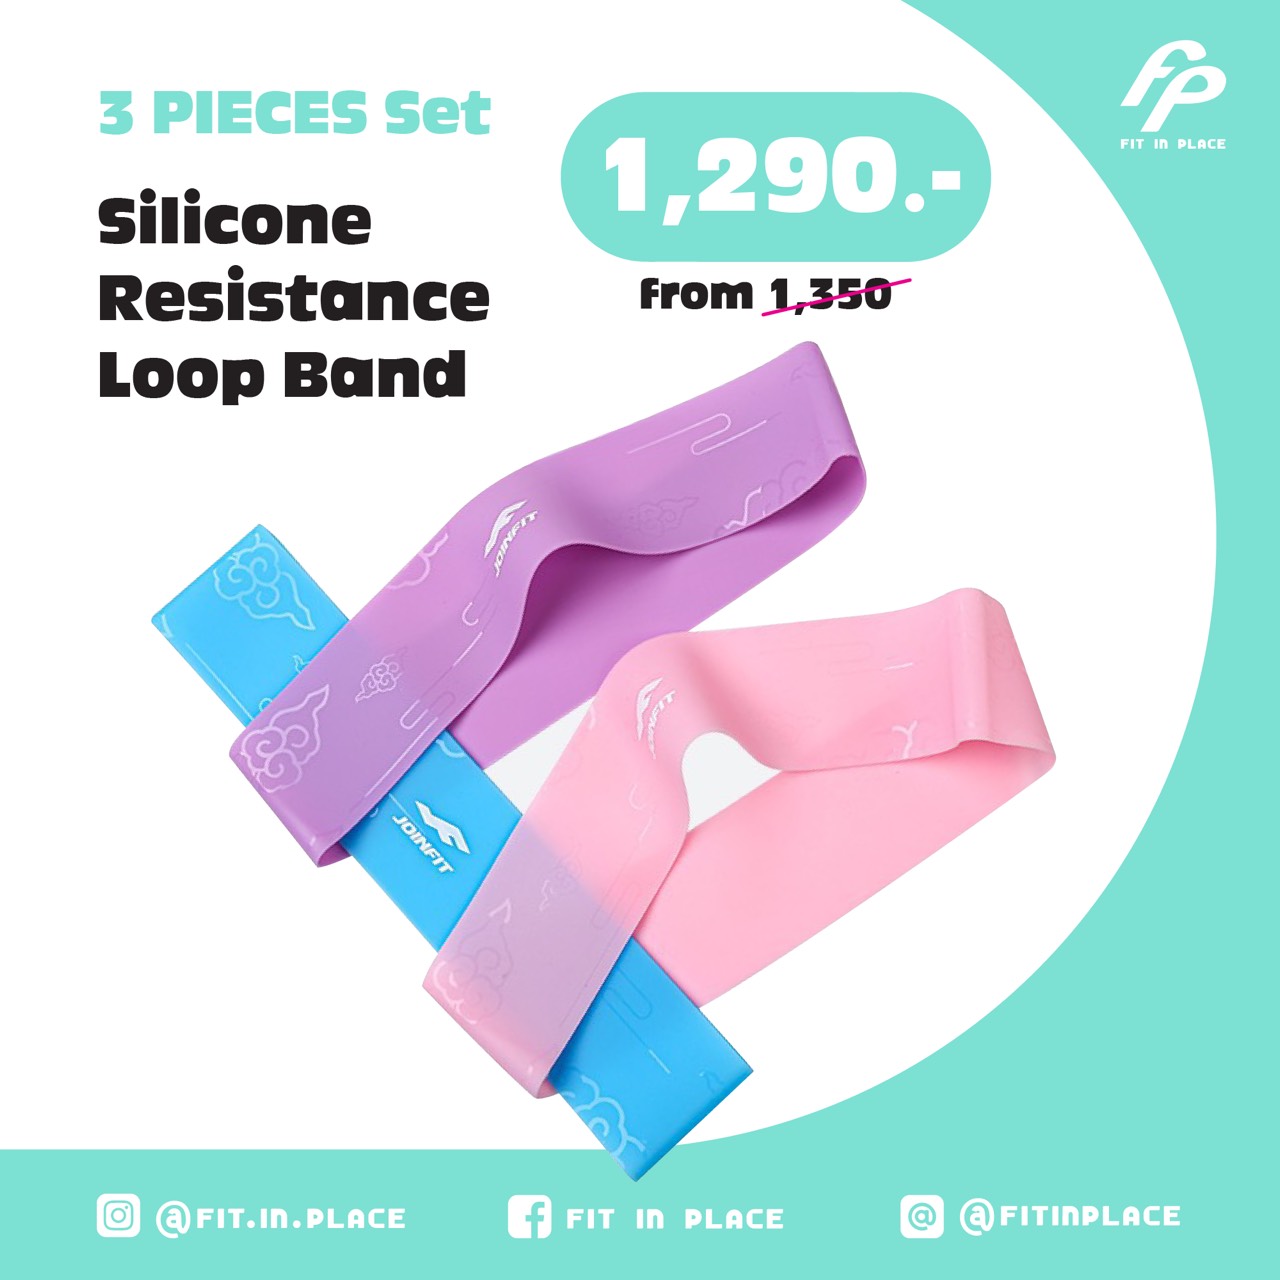 Fit in Place - Joinfit Silicone Resistance Loop Band (3Pieces Set)